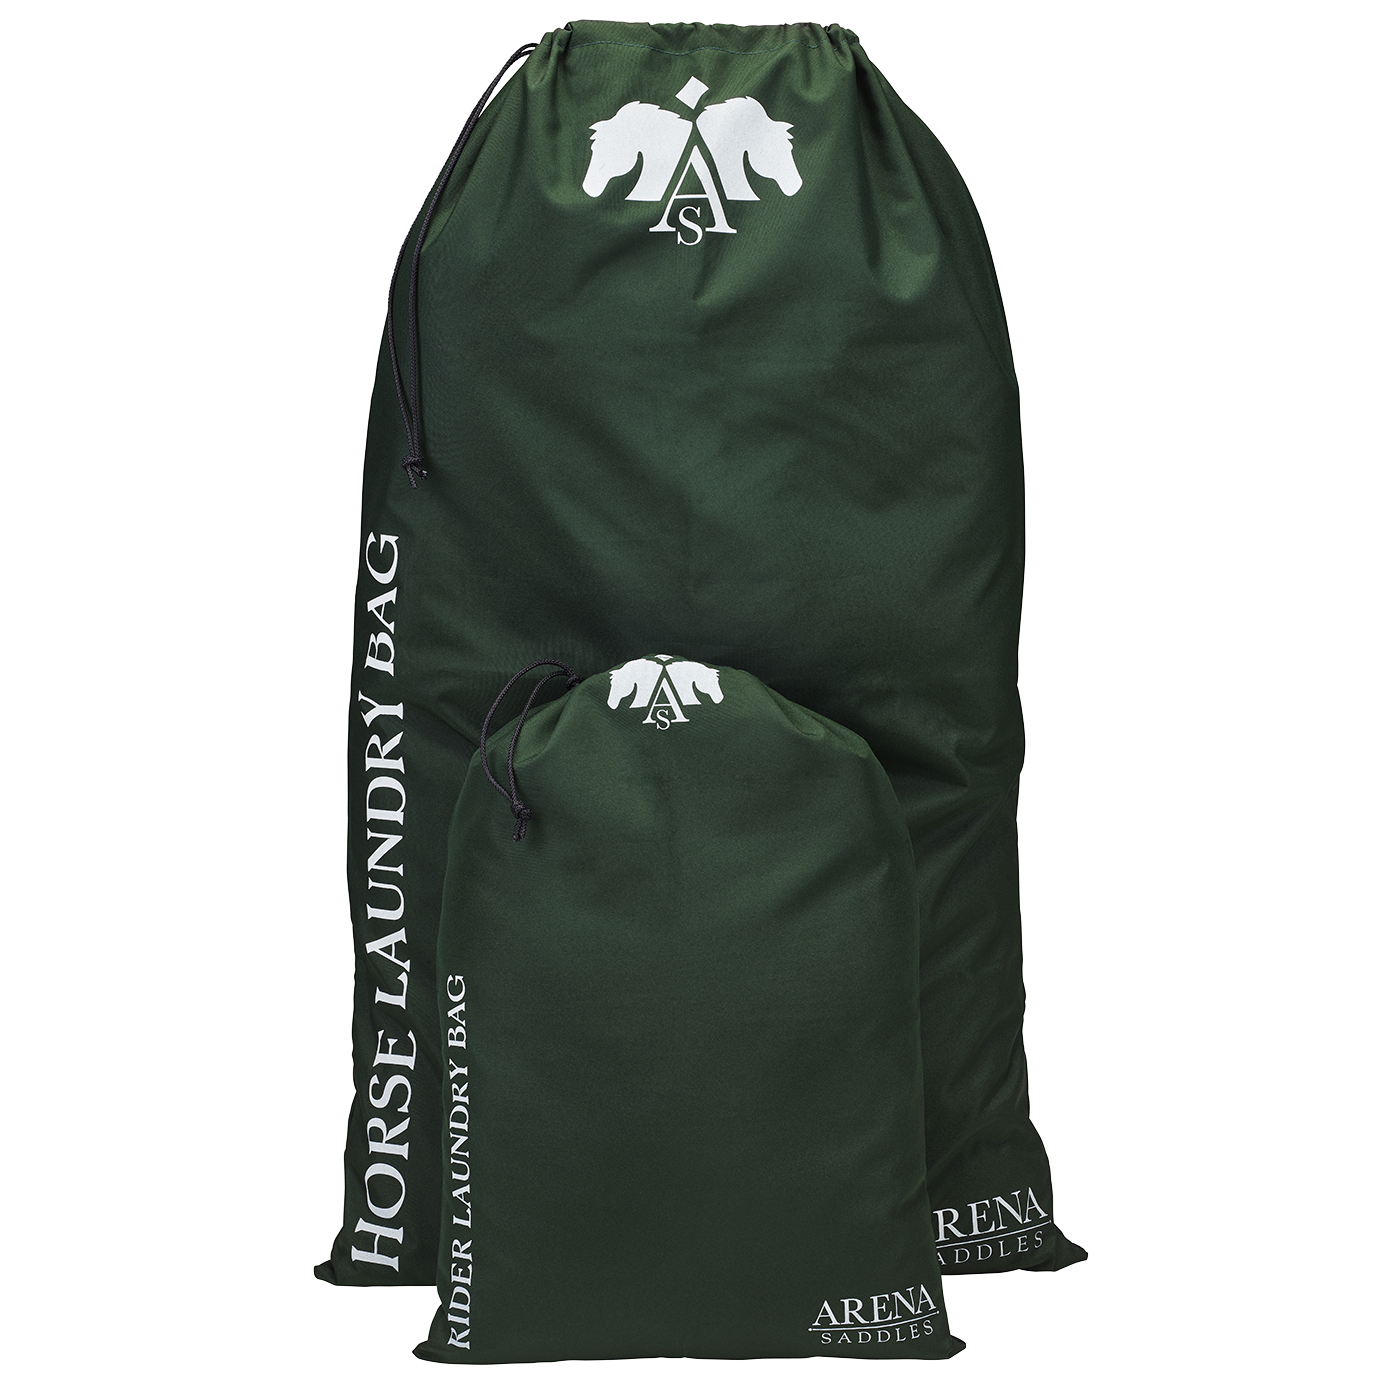 Arena Laundry Bags - 718:40312046157858